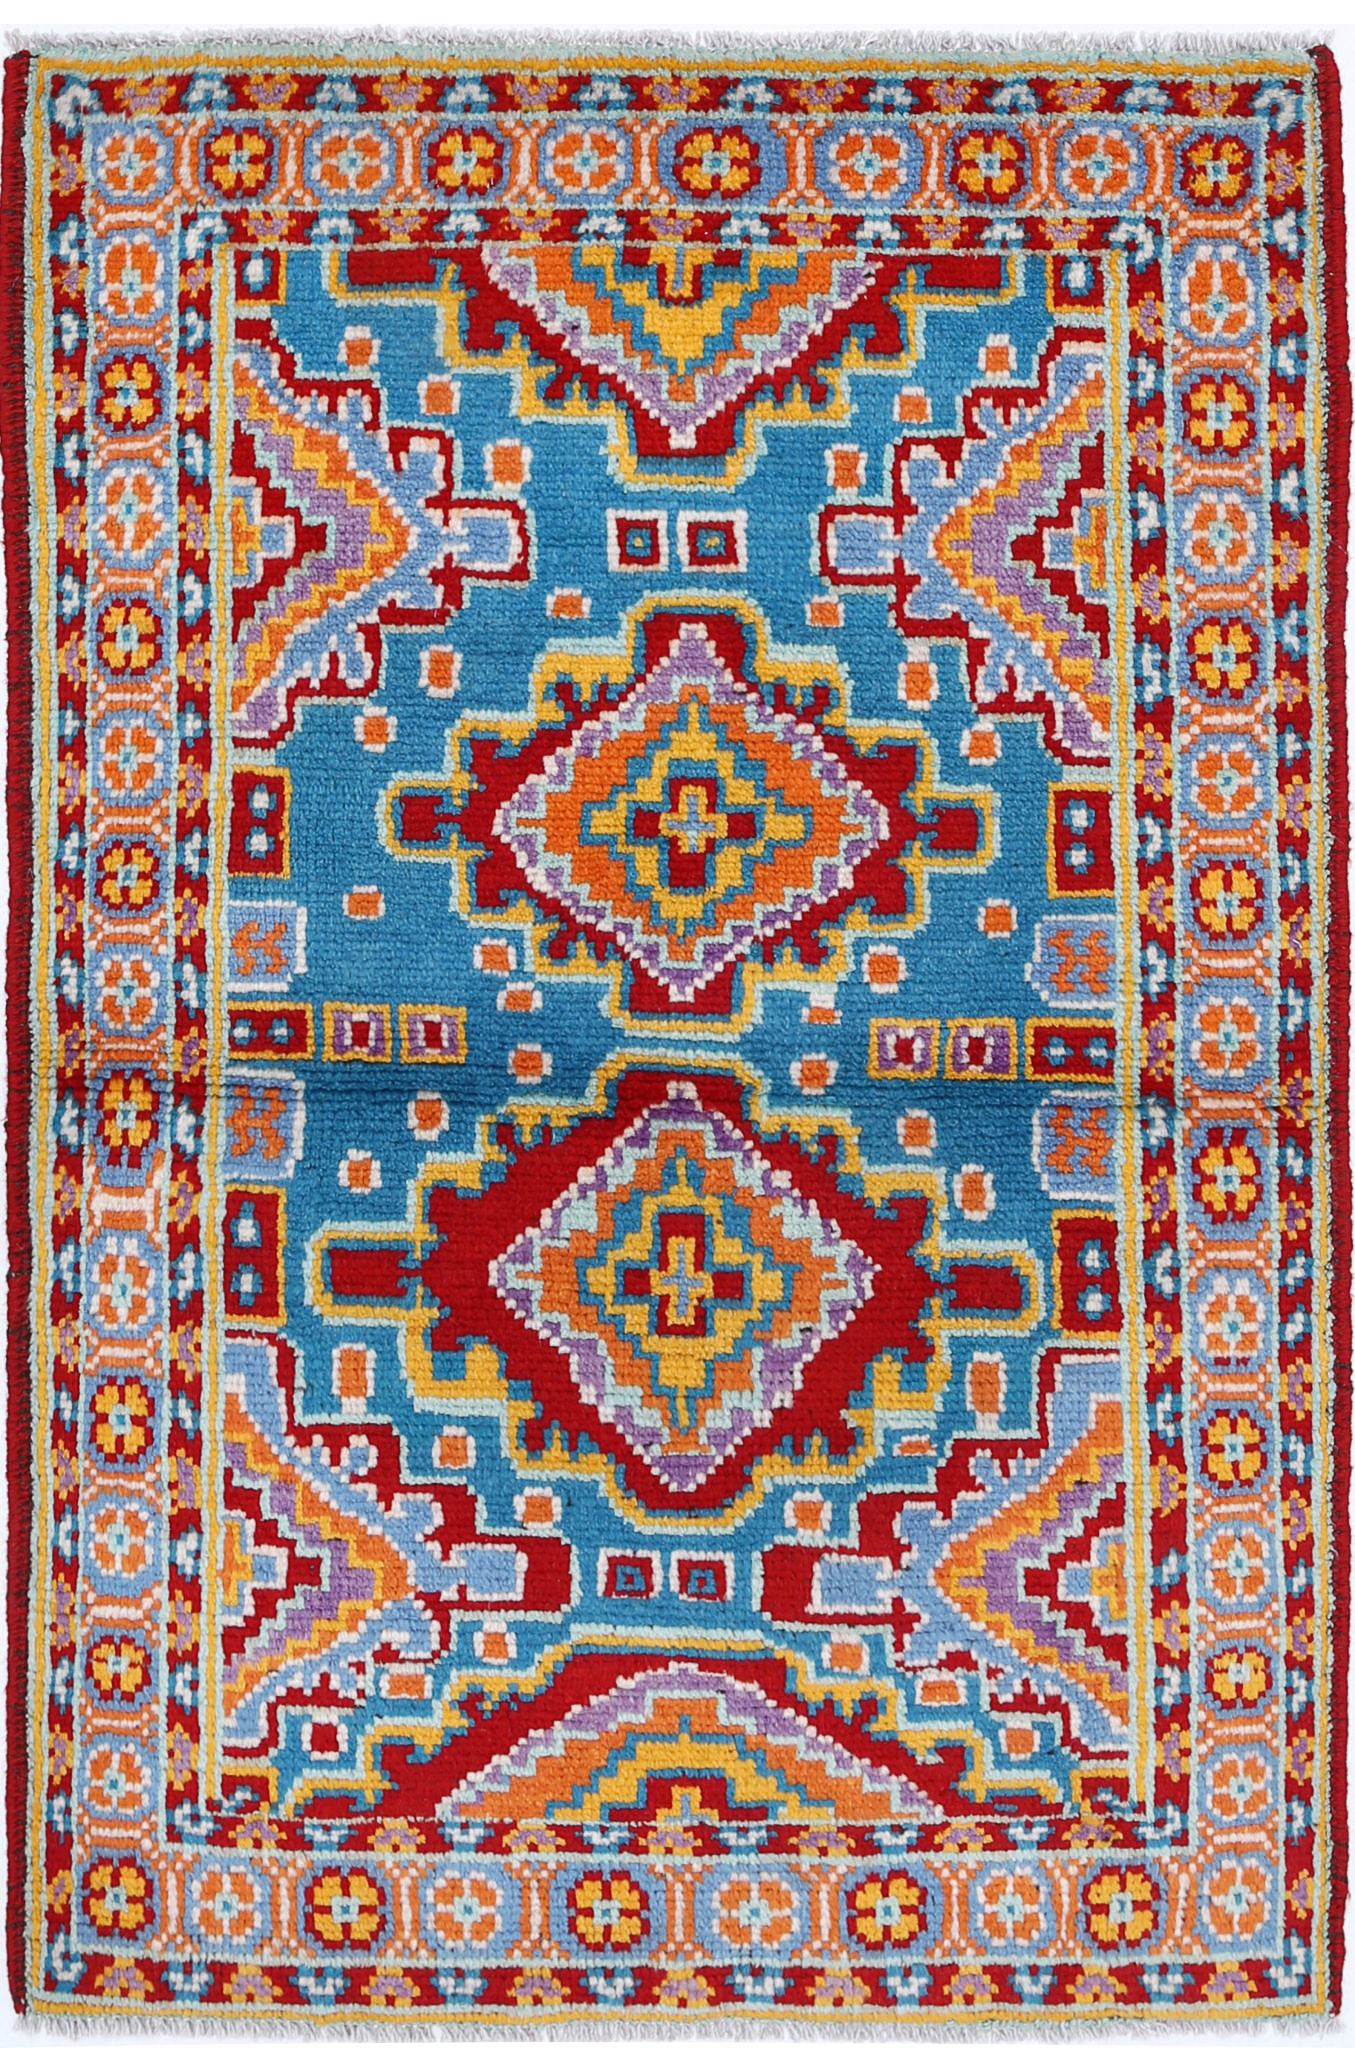 Revival-hand-knotted-qarghani-wool-rug-5014008.jpg